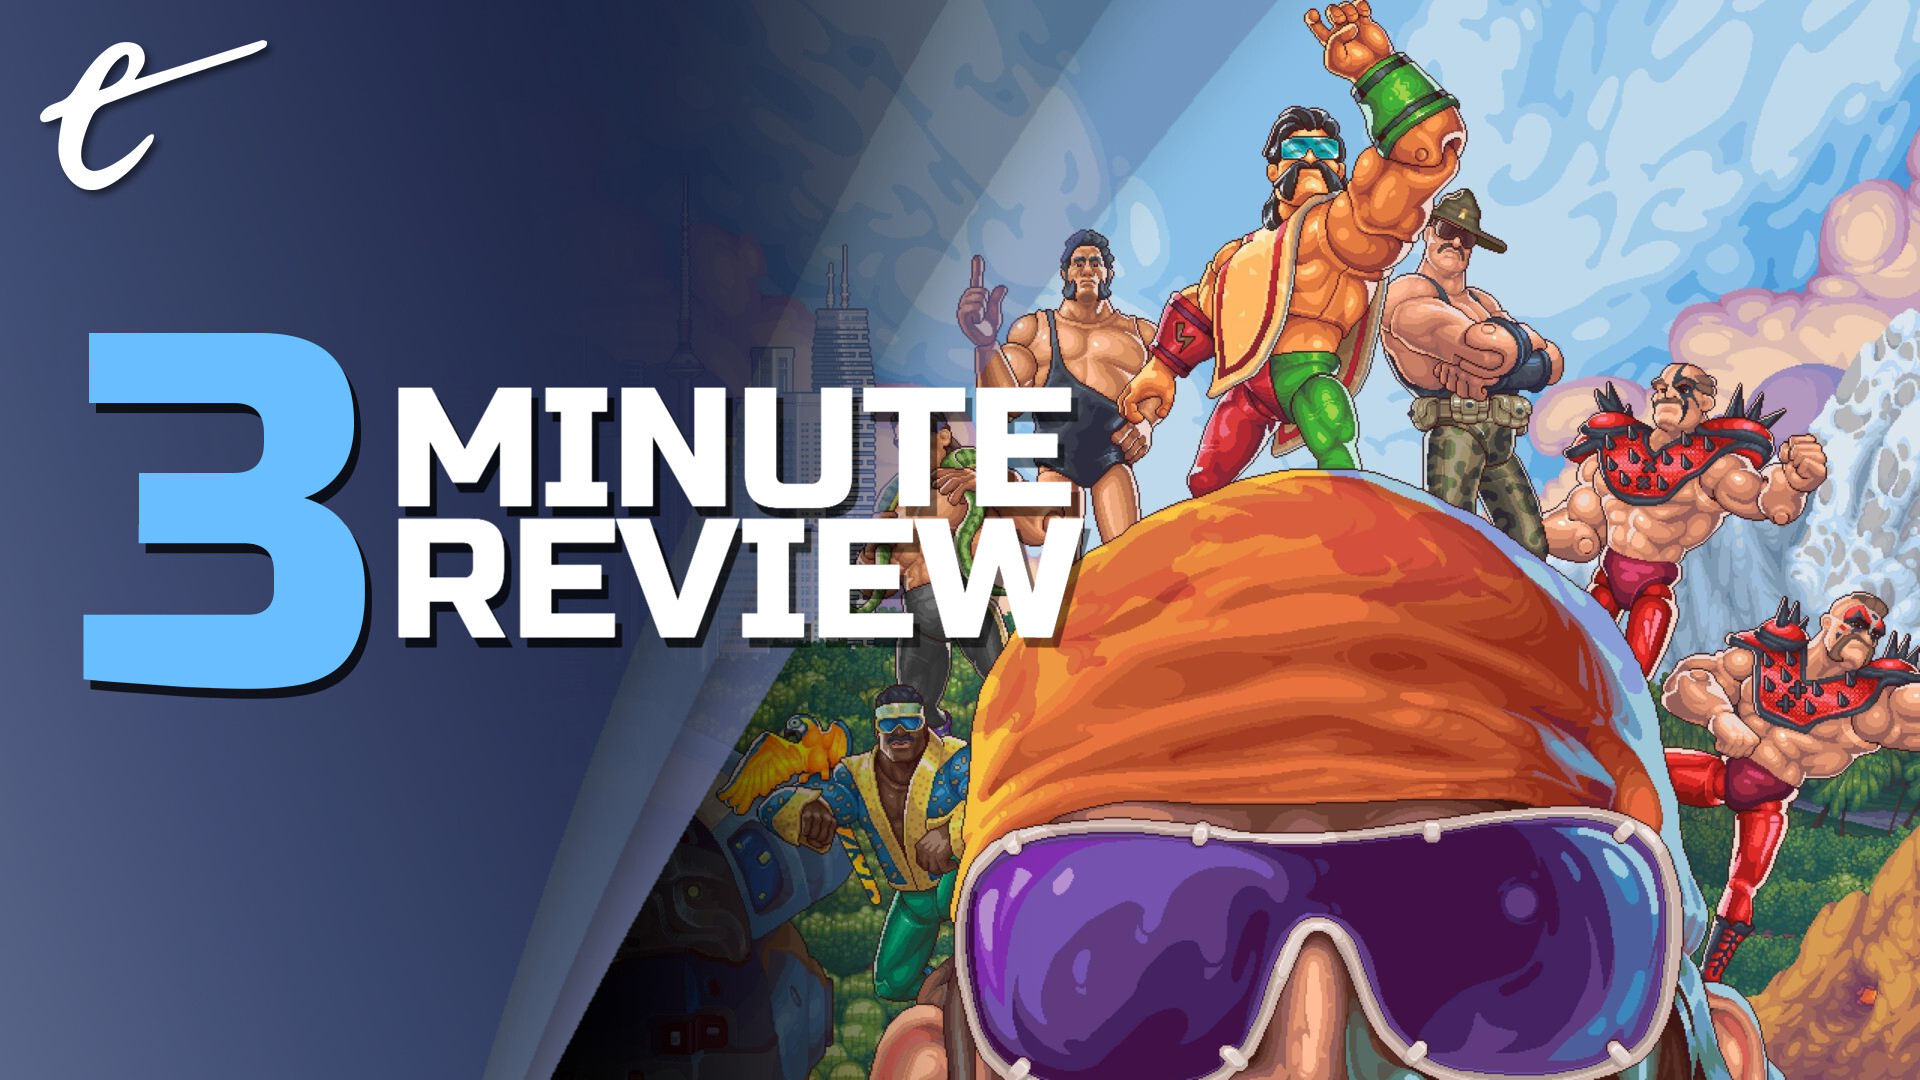 WRESTLEQUEST Review: Oh Yeah Brother, This Game Is Too Sweet